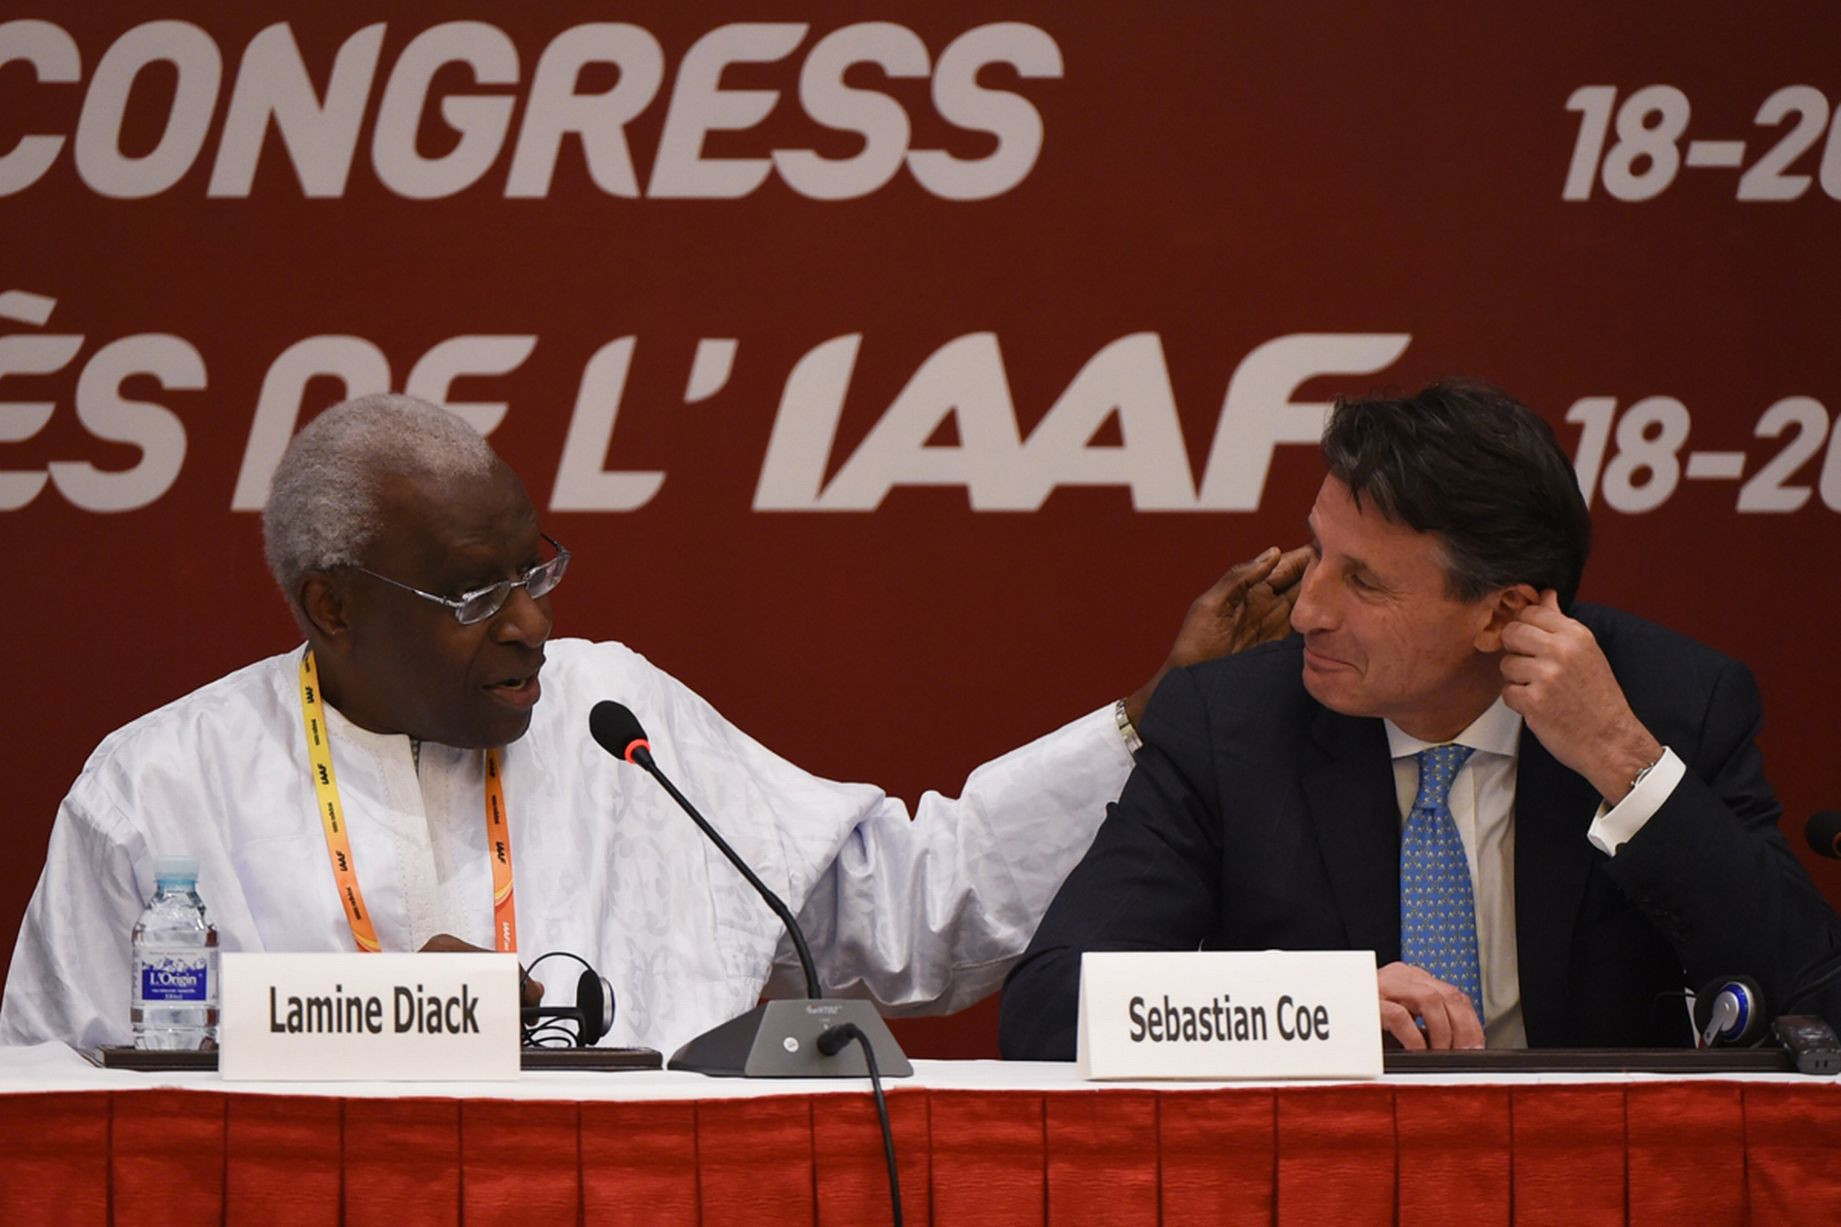 Sebastian Coe succeeded Lamine Diack as President of the IAAF at its Congress in Beijing in 2015 following the Senegalese's 16-year term which is now the subject of a criminal investigation ©Getty Images